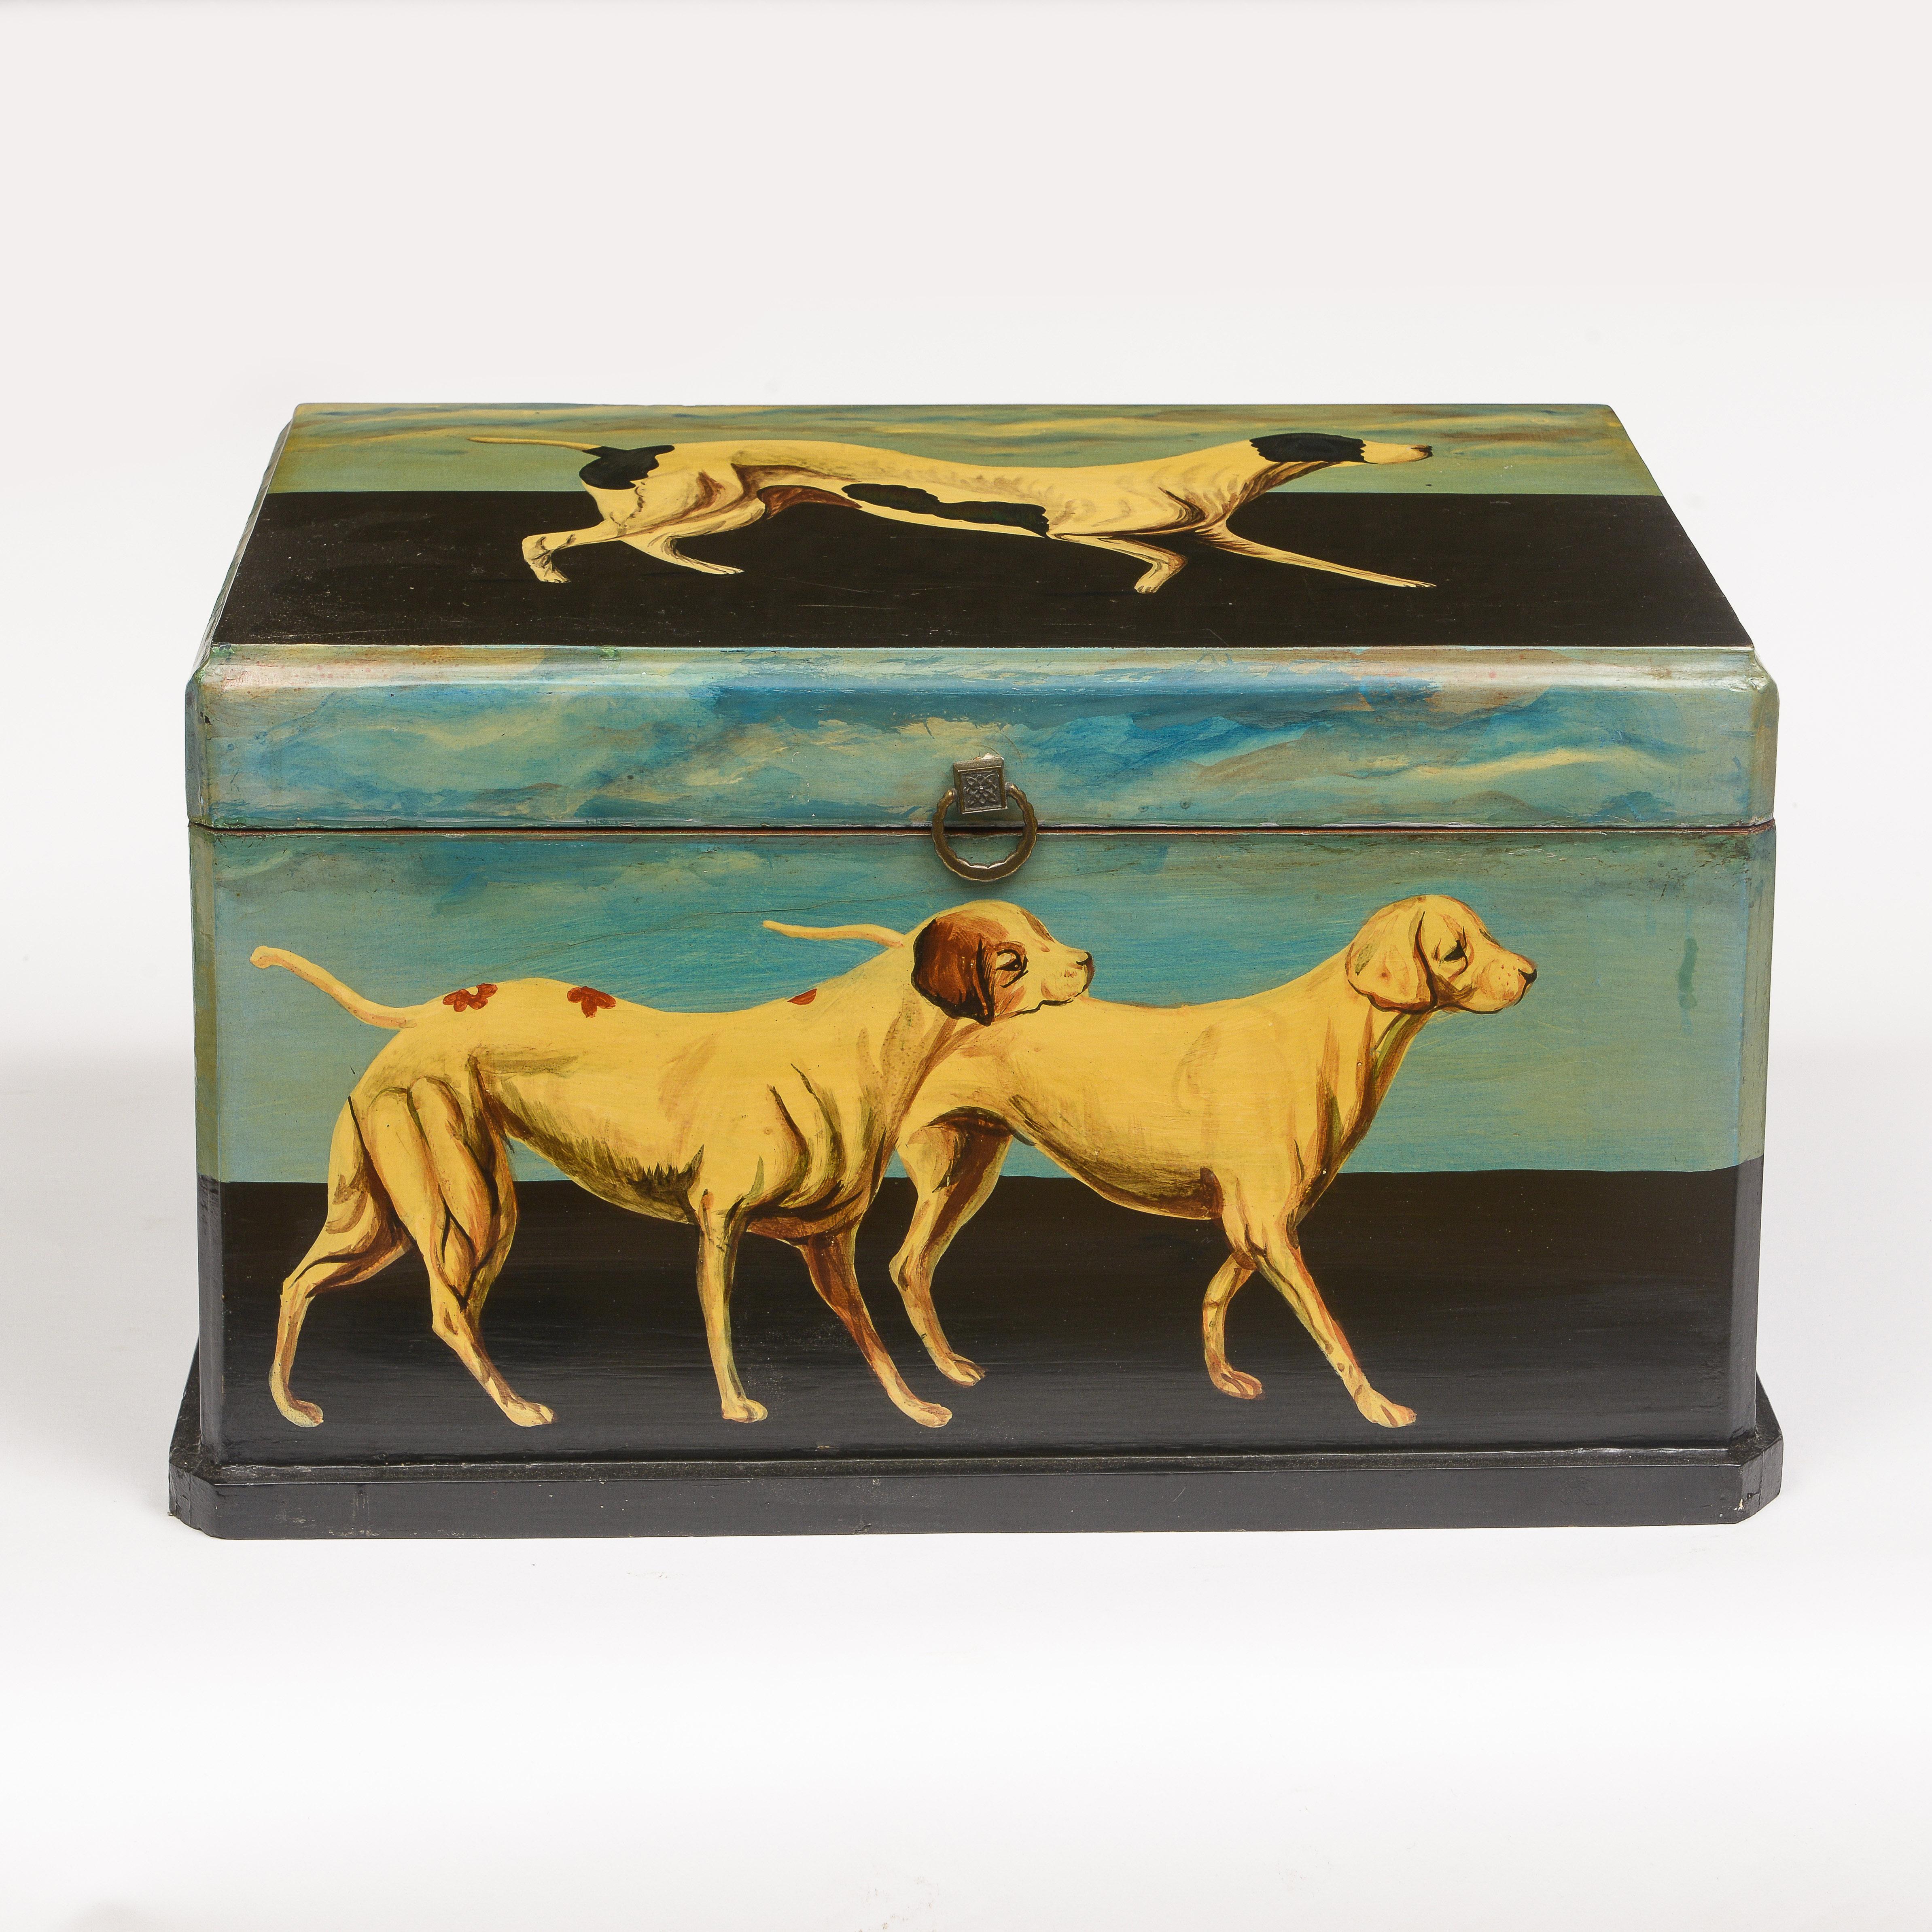 Beautifully dog painted box
Lined with gingham fabric
Perfect for storage of dog accessories.